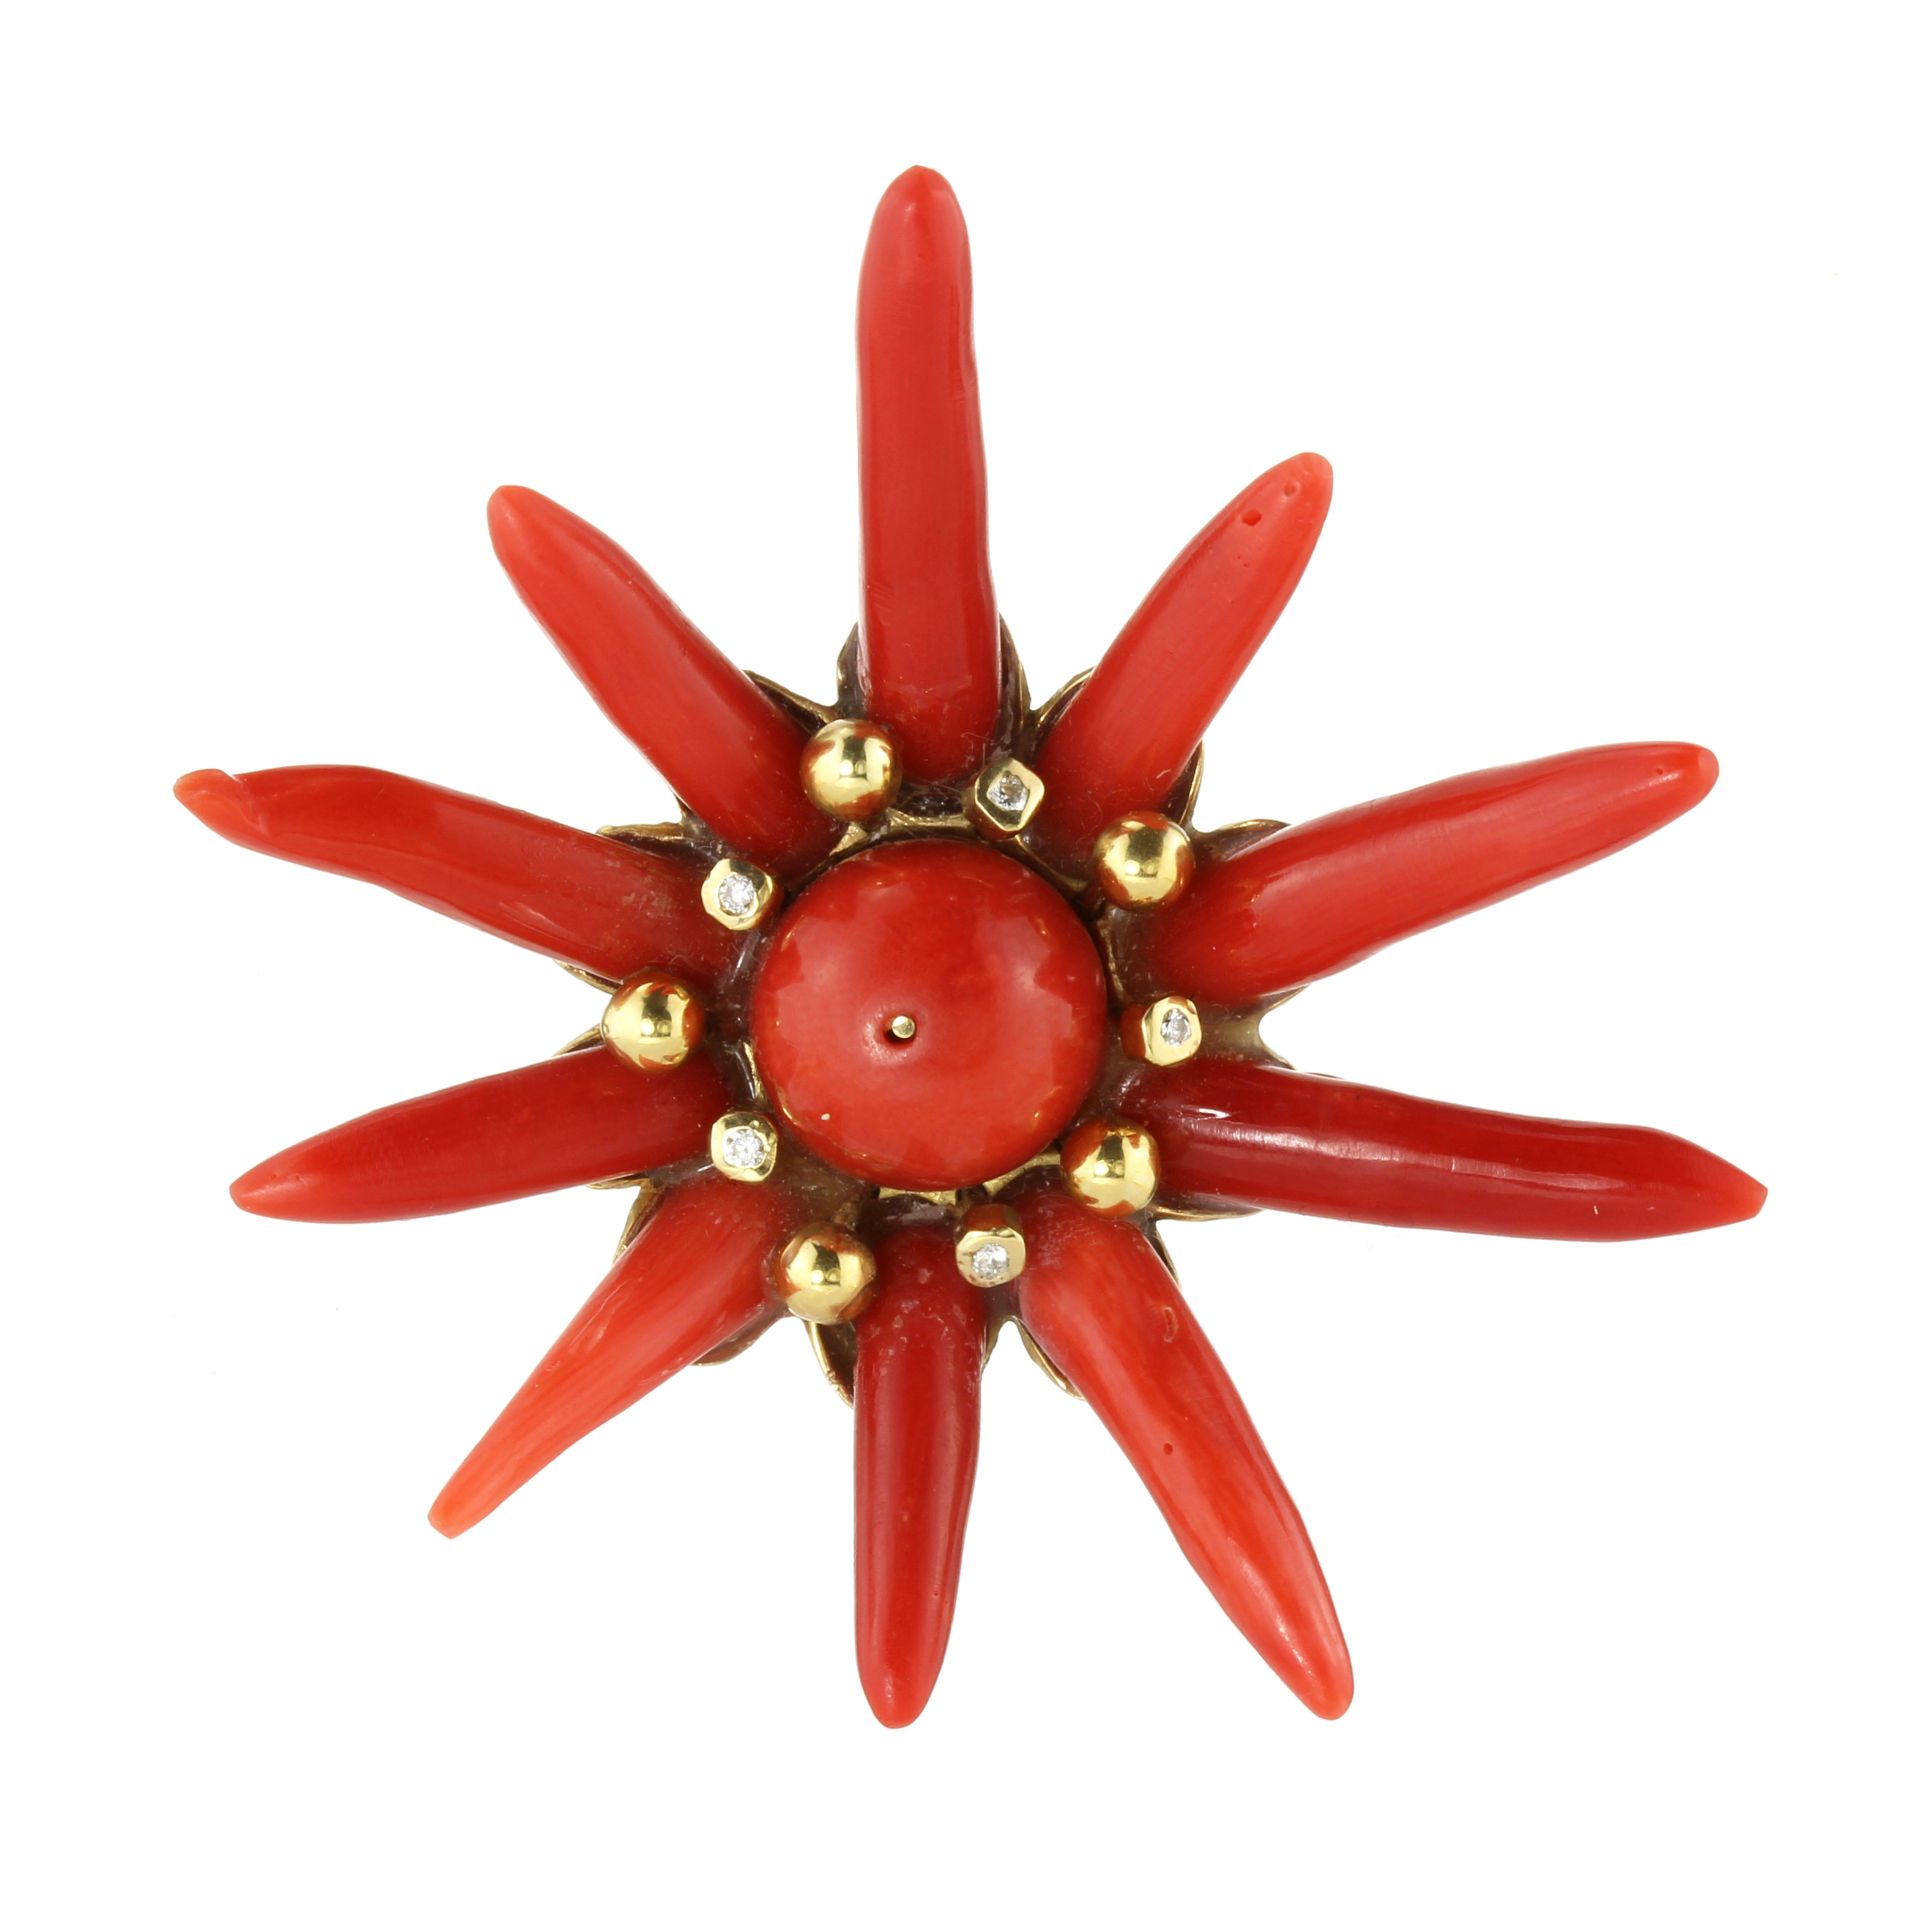 A CORAL PENDANT in 18ct yellow gold, set with a central polished coral bead of 12mm surrounded by